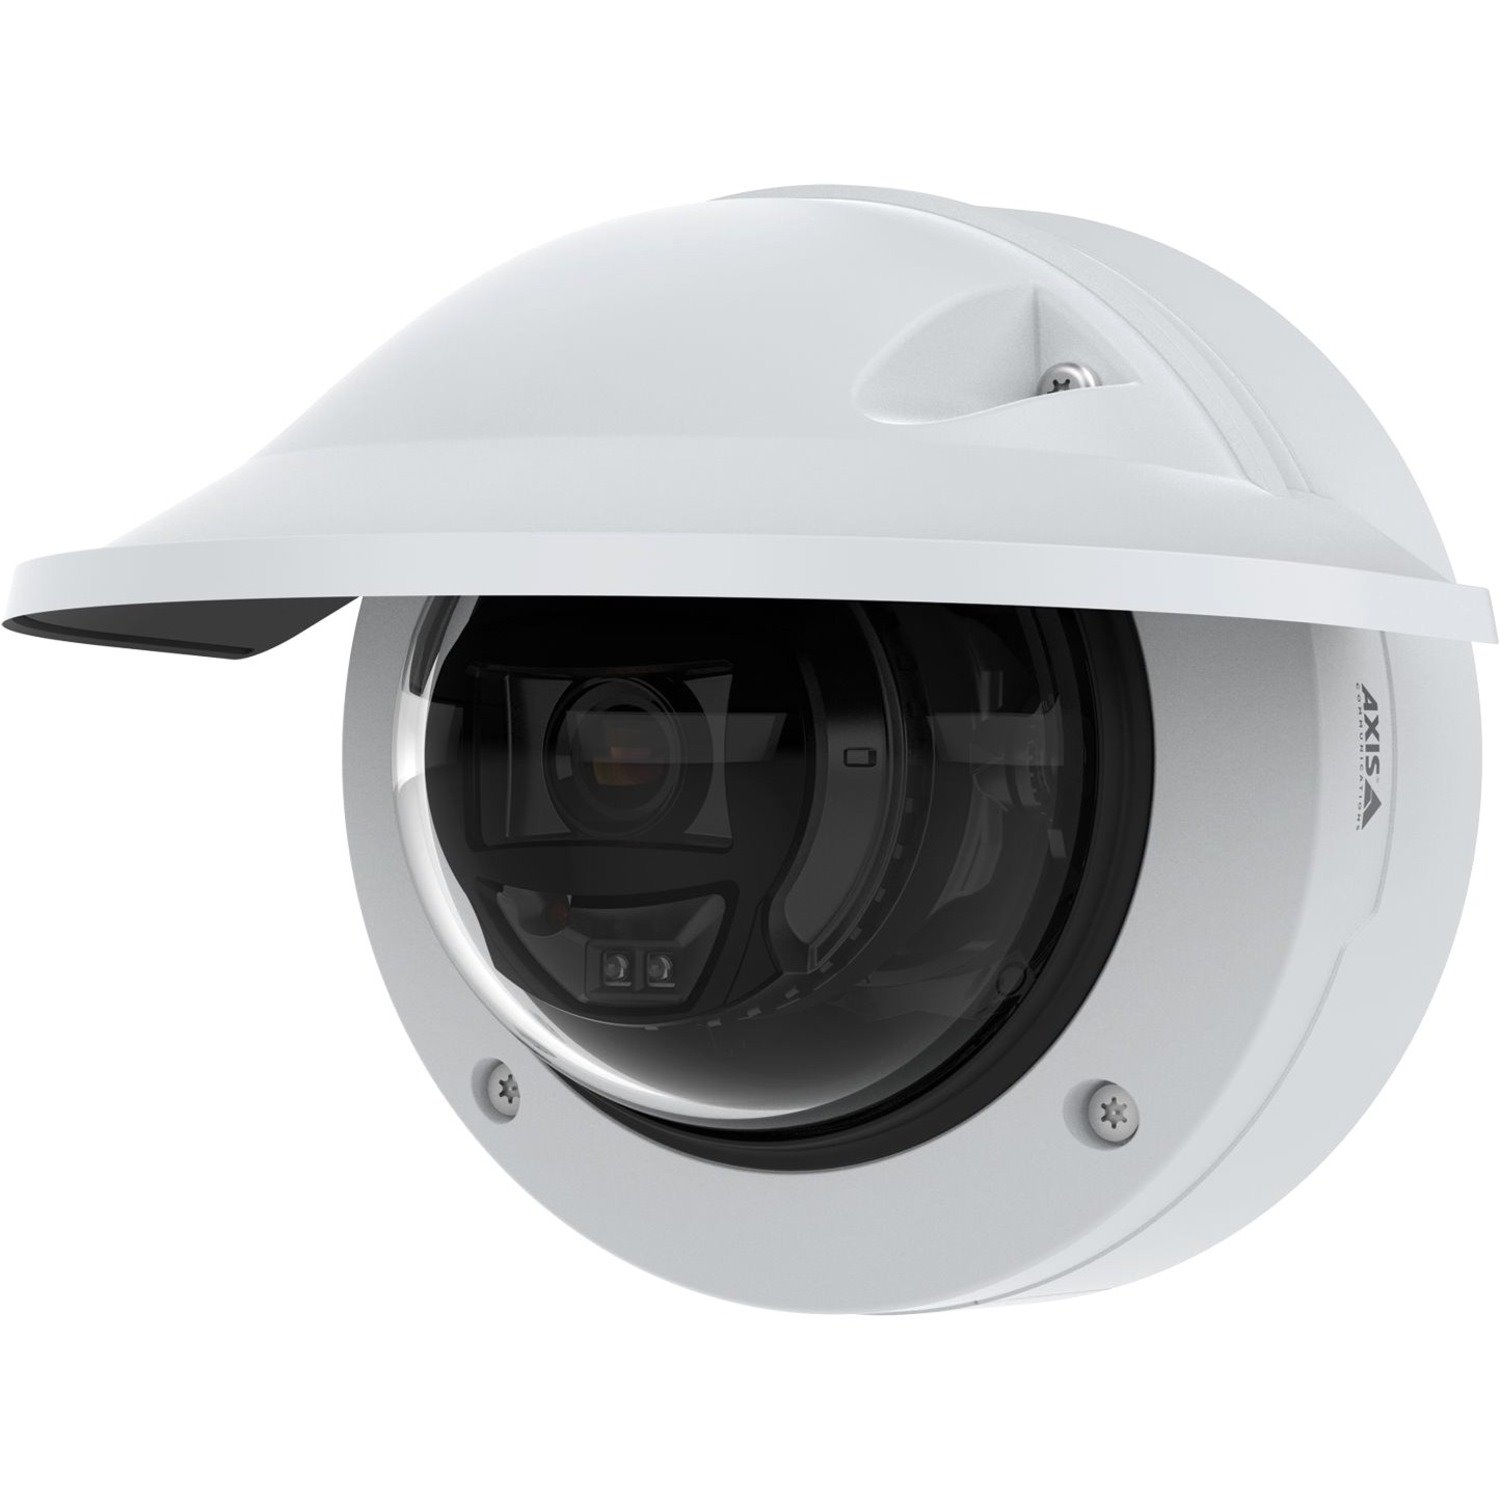 AXIS P3265-LVE 2 Megapixel Outdoor Full HD Network Camera - Color - Dome - TAA Compliant